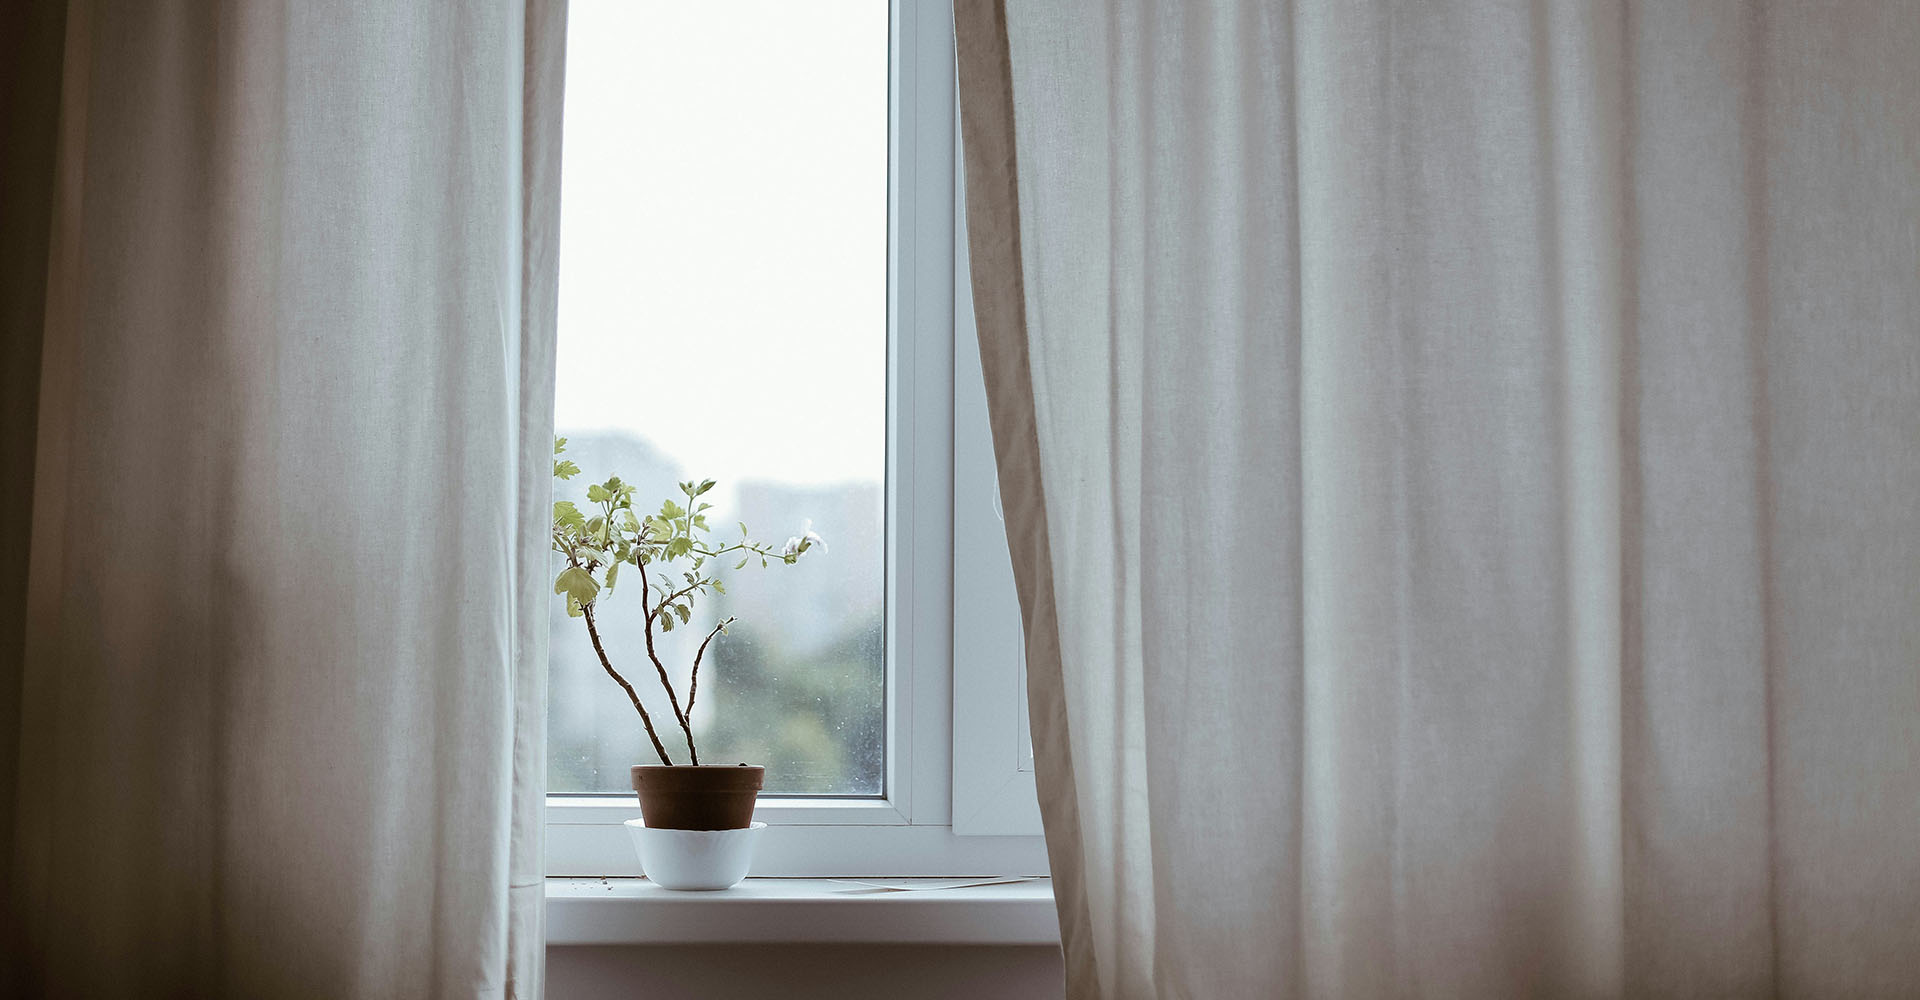 small tree plant sitting on windowsill with beige curtains on either side of the window, Sheaff Brock investment advisors blog, retail consumers